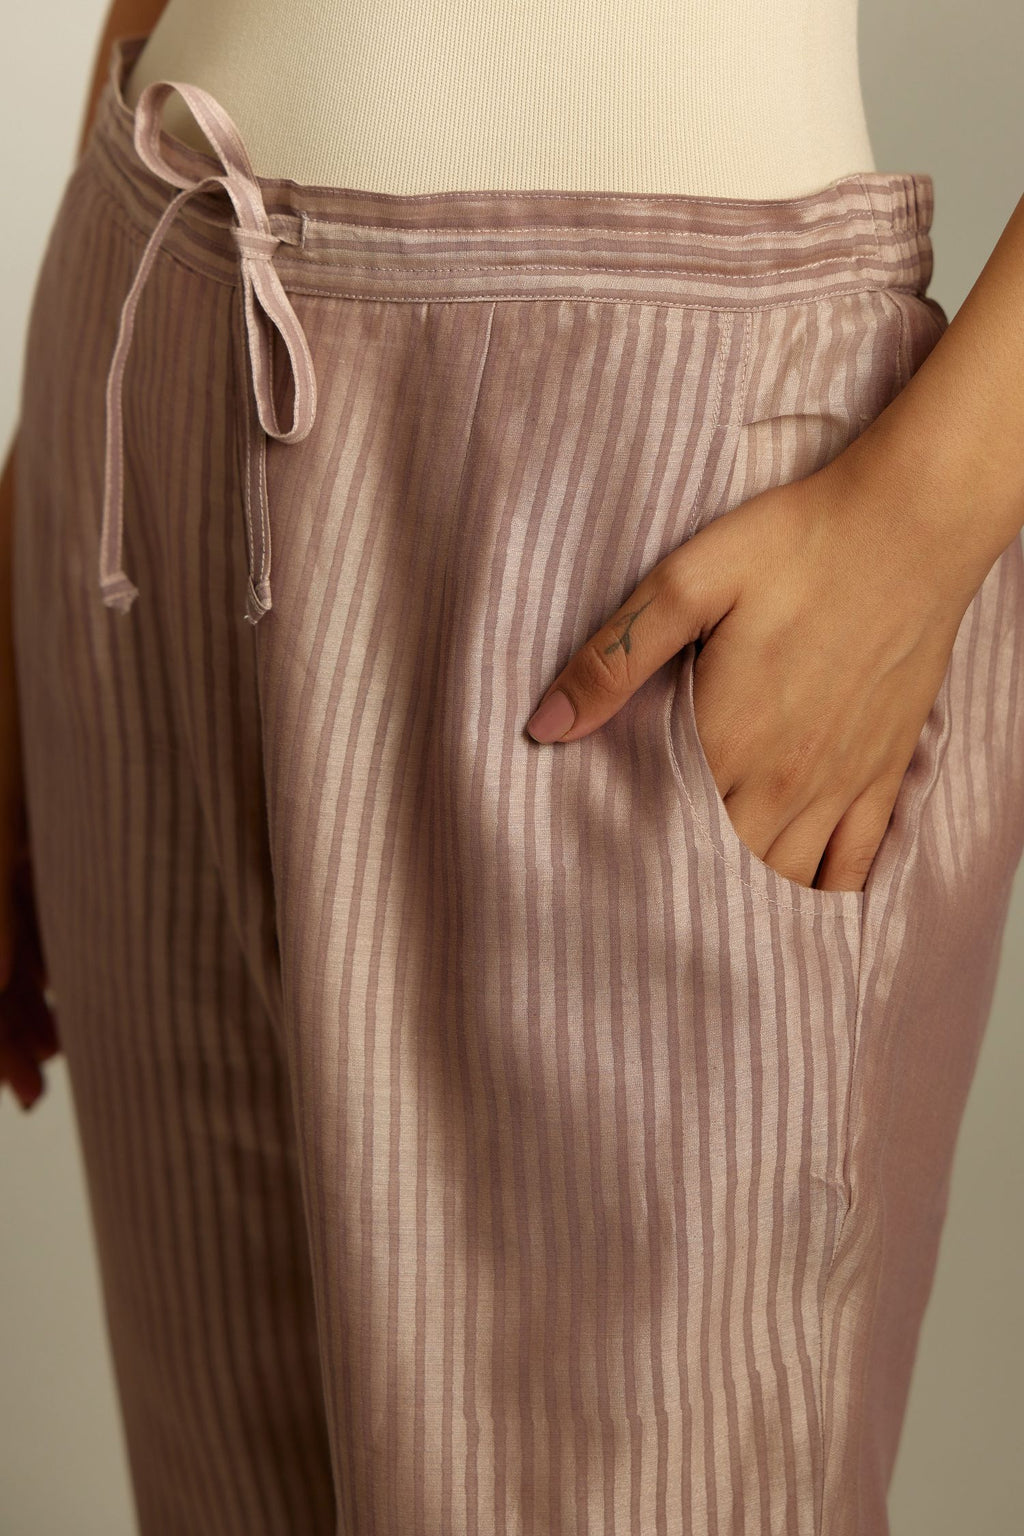 Lilac striped hand block printed silk chanderi pants, highlighted with gota and zari embroidery at hem.